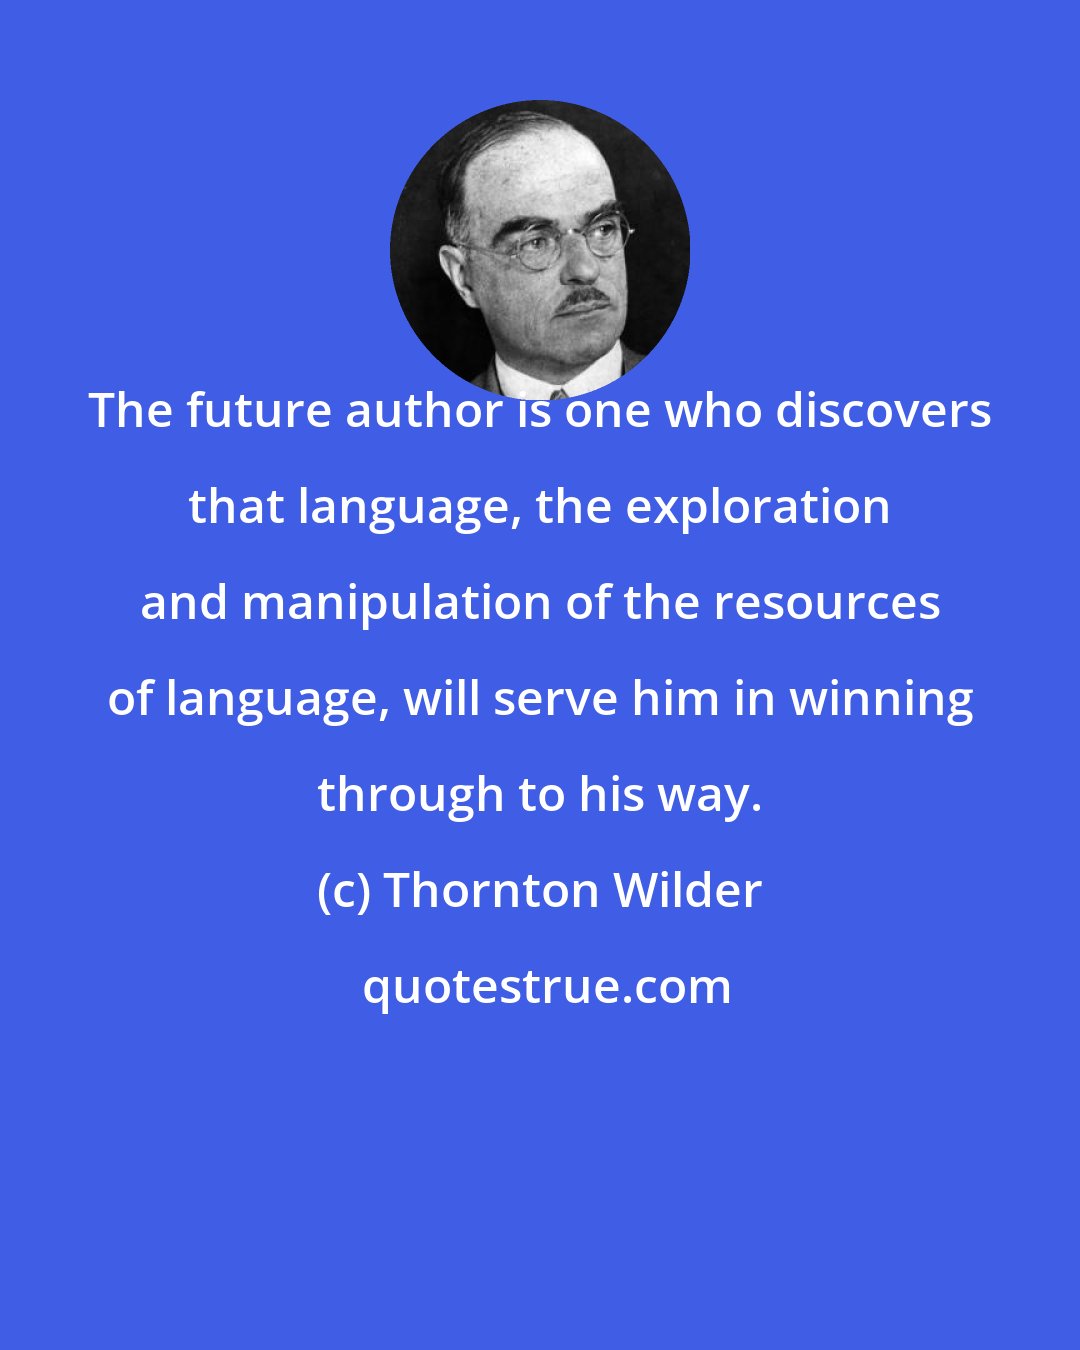 Thornton Wilder: The future author is one who discovers that language, the exploration and manipulation of the resources of language, will serve him in winning through to his way.